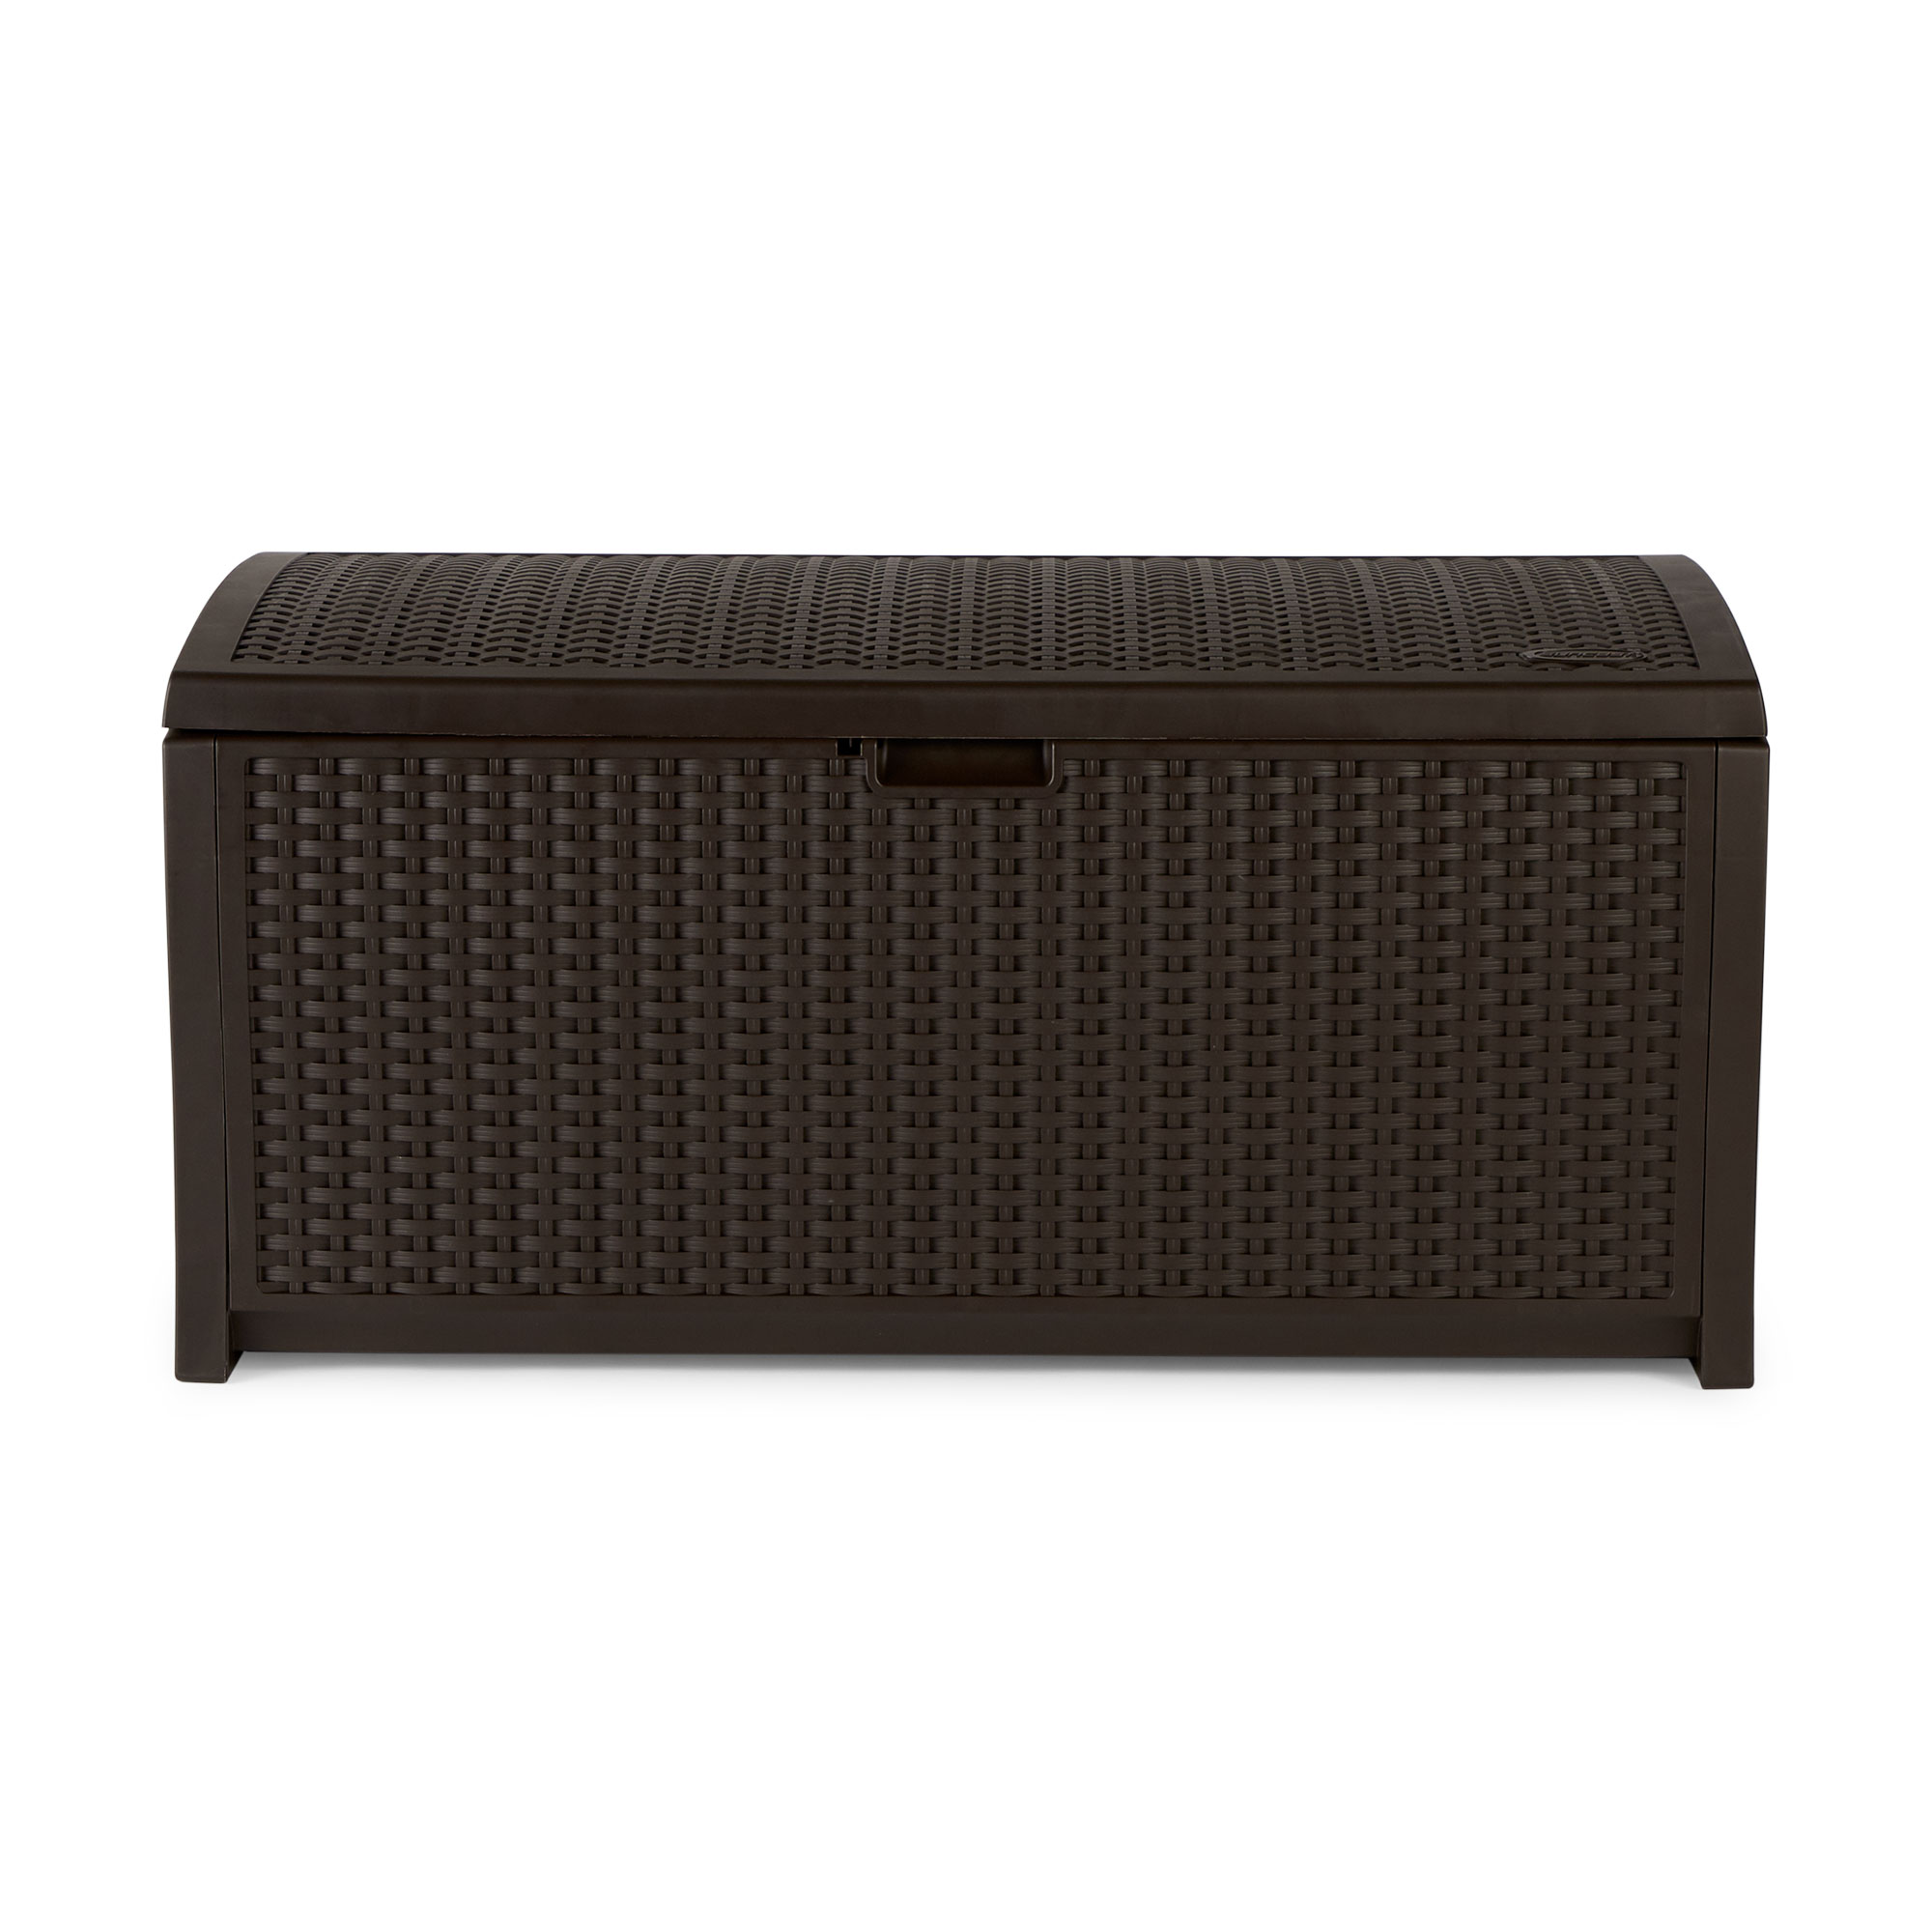 Suncast Indoor and Outdoor 73 Gallon Resin Deck Box with Seat, Mocha Brown, 46 in D x 22.5 in H x 21.6 in W - image 2 of 8